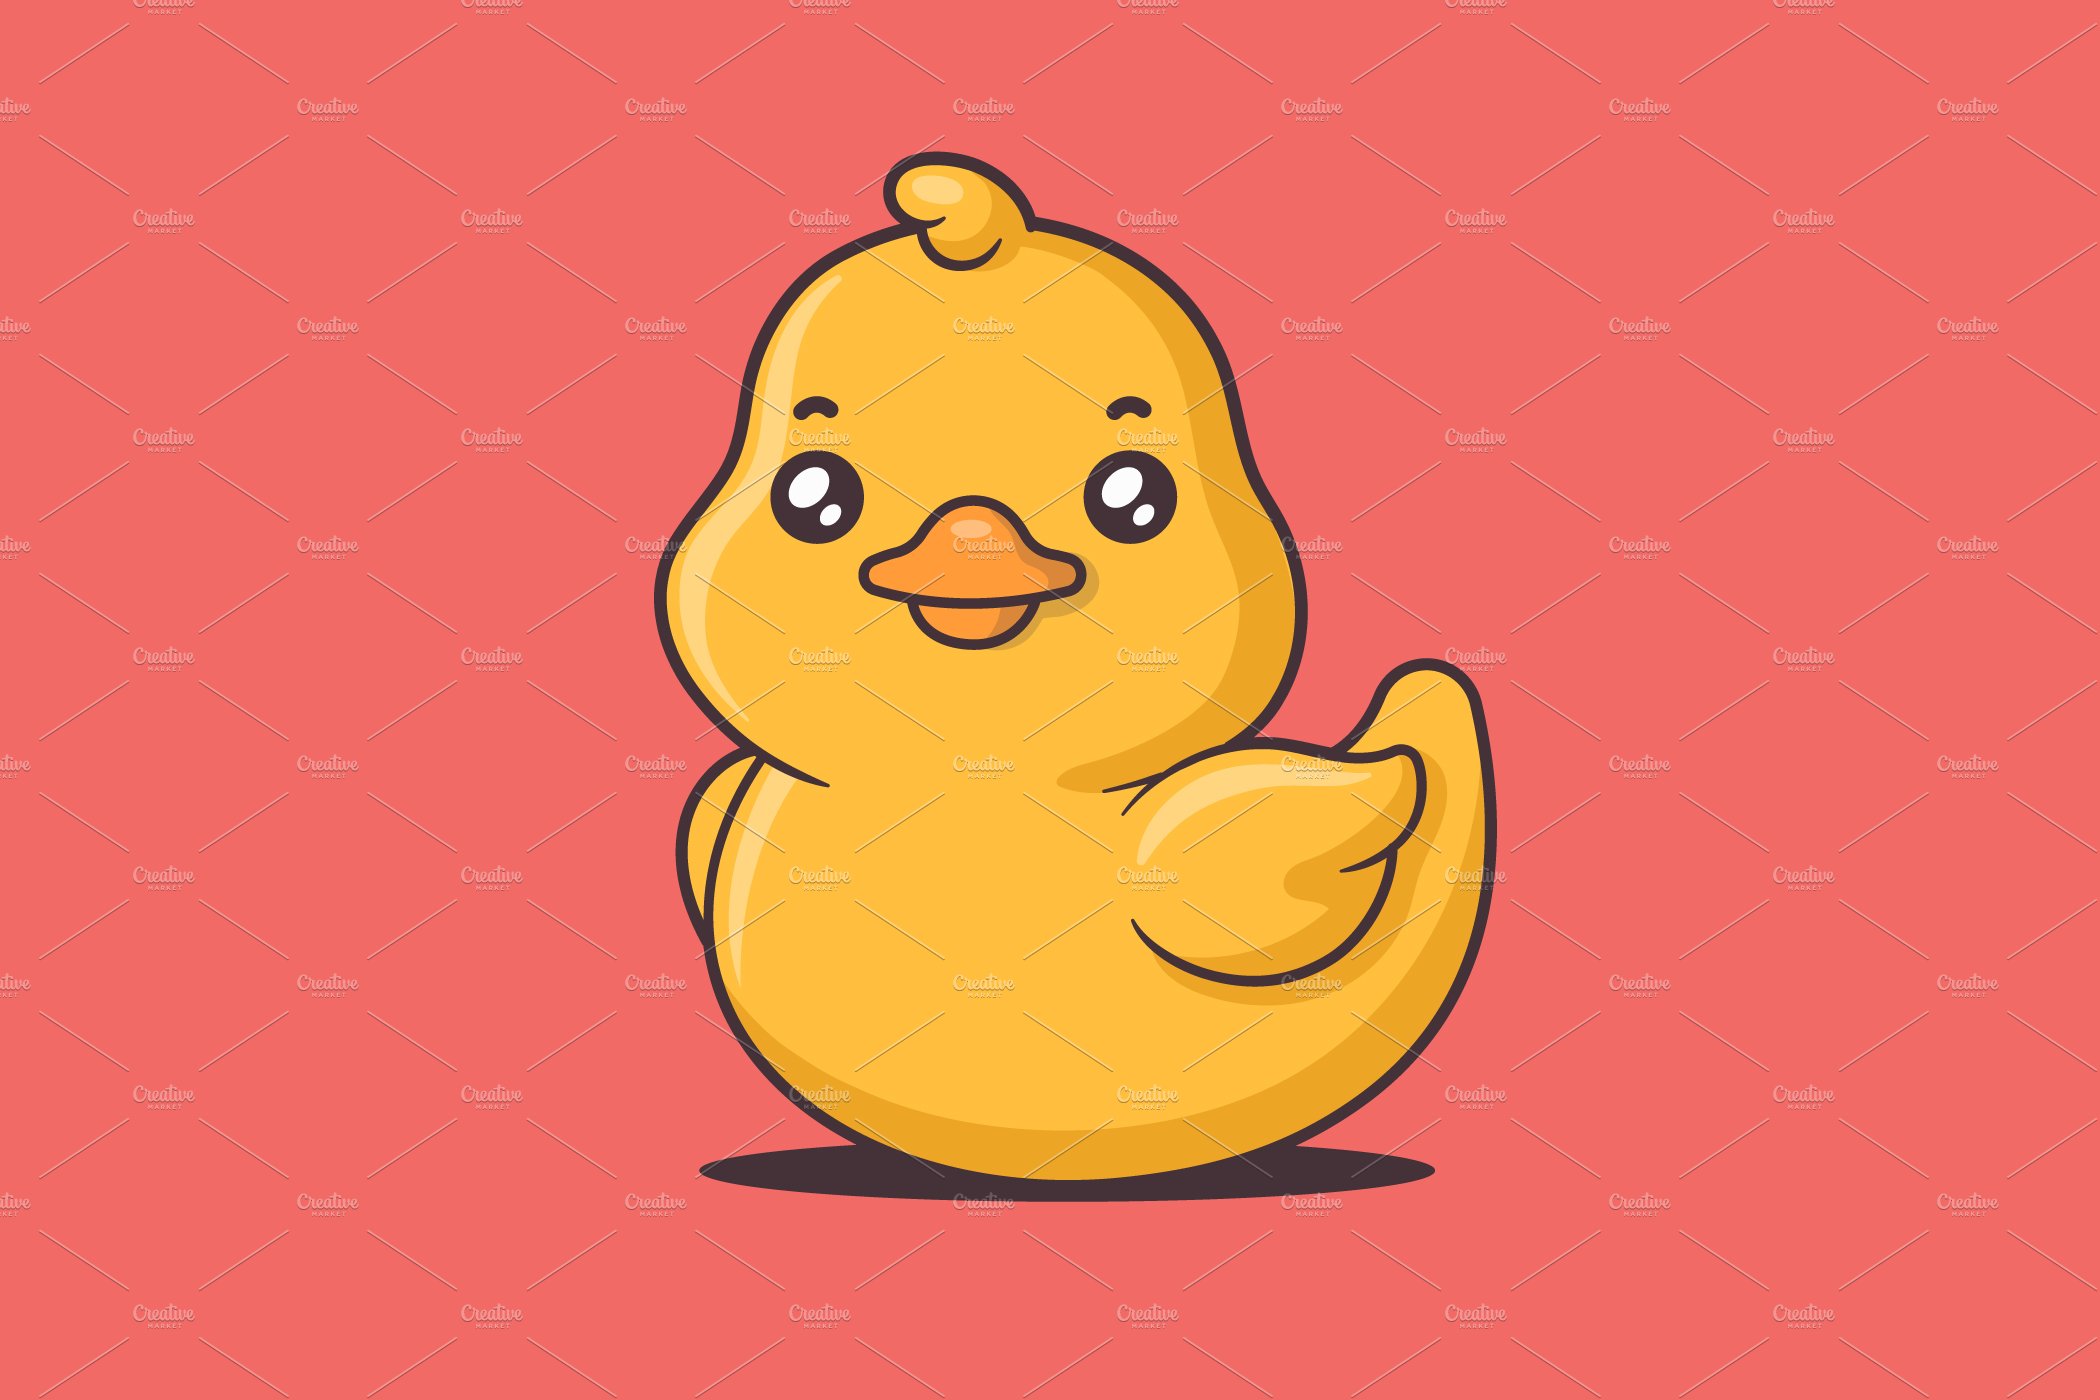 Rubber Duck Kawaii cover image.